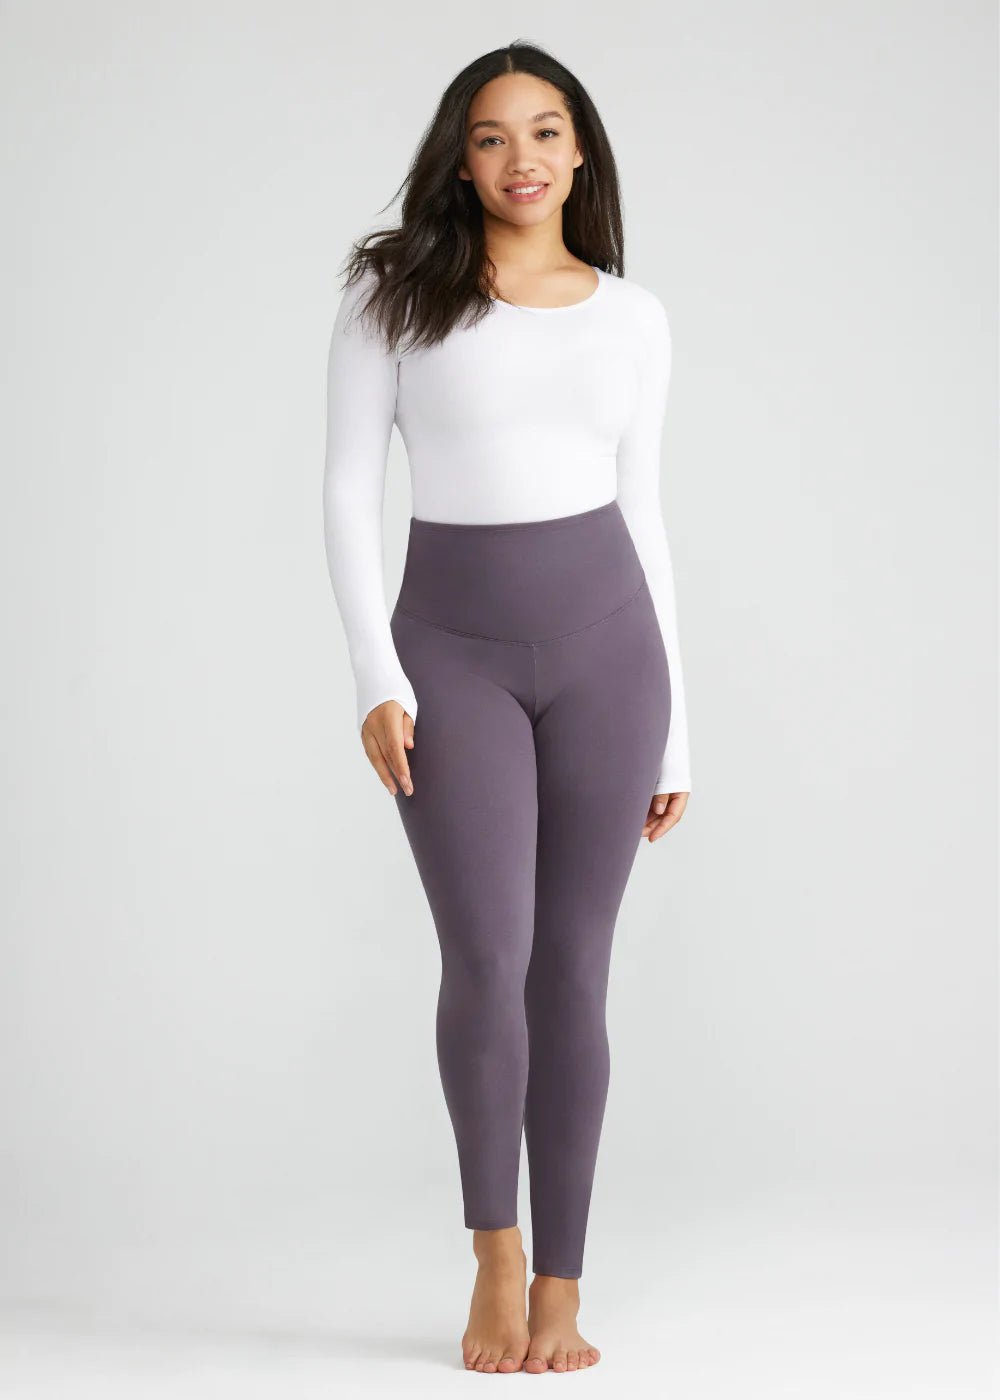 Yummie® Rachel Compact Cotton Leggings with Pockets